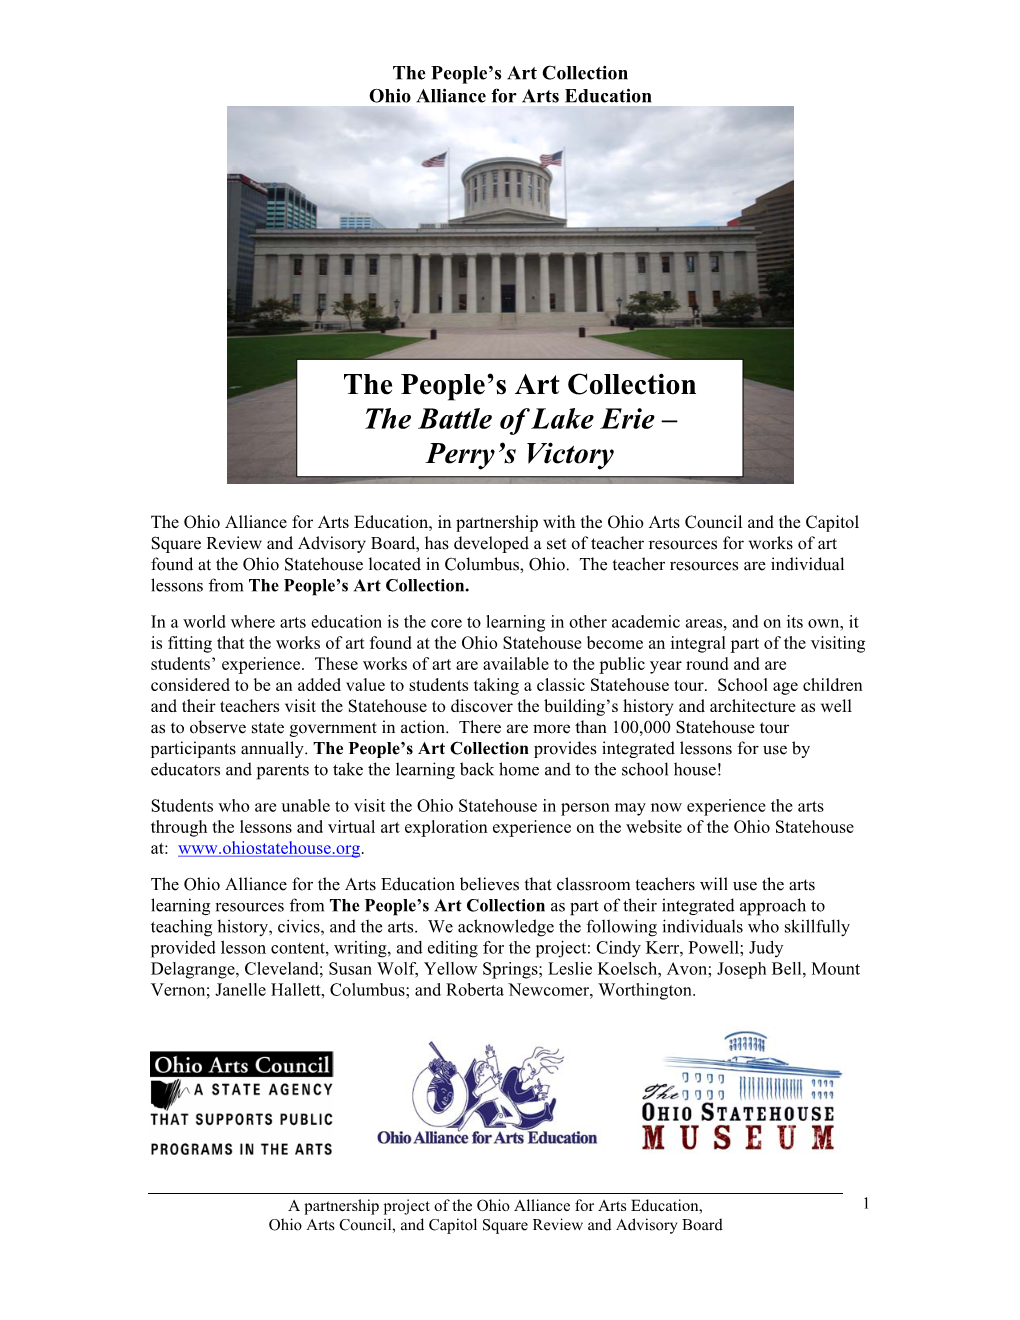 The People's Art Collection the Battle of Lake Erie – Perry's Victory